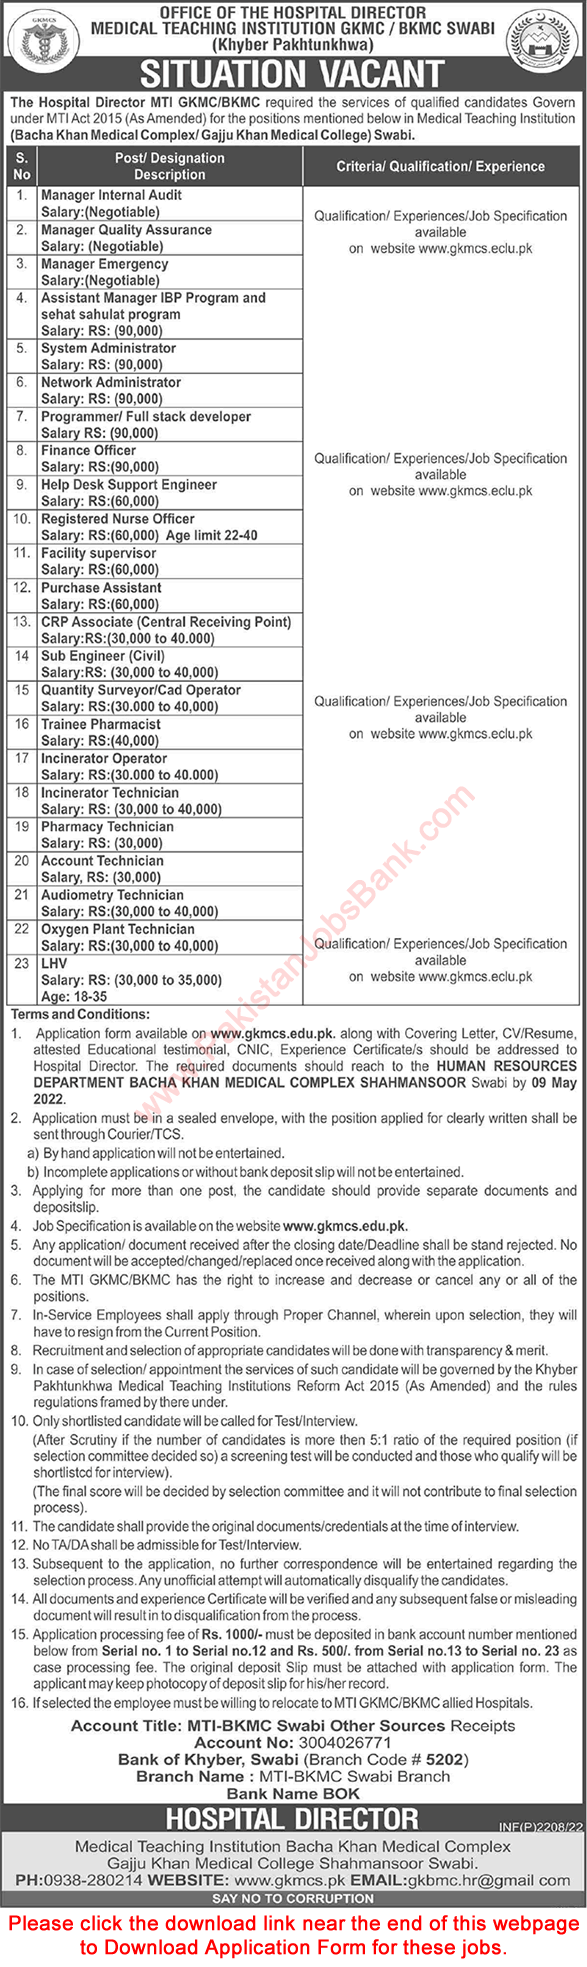 Bacha Khan Medical Complex Swabi Jobs April 2022 GKMC BKMC Application Form Assistant Managers & Others Latest